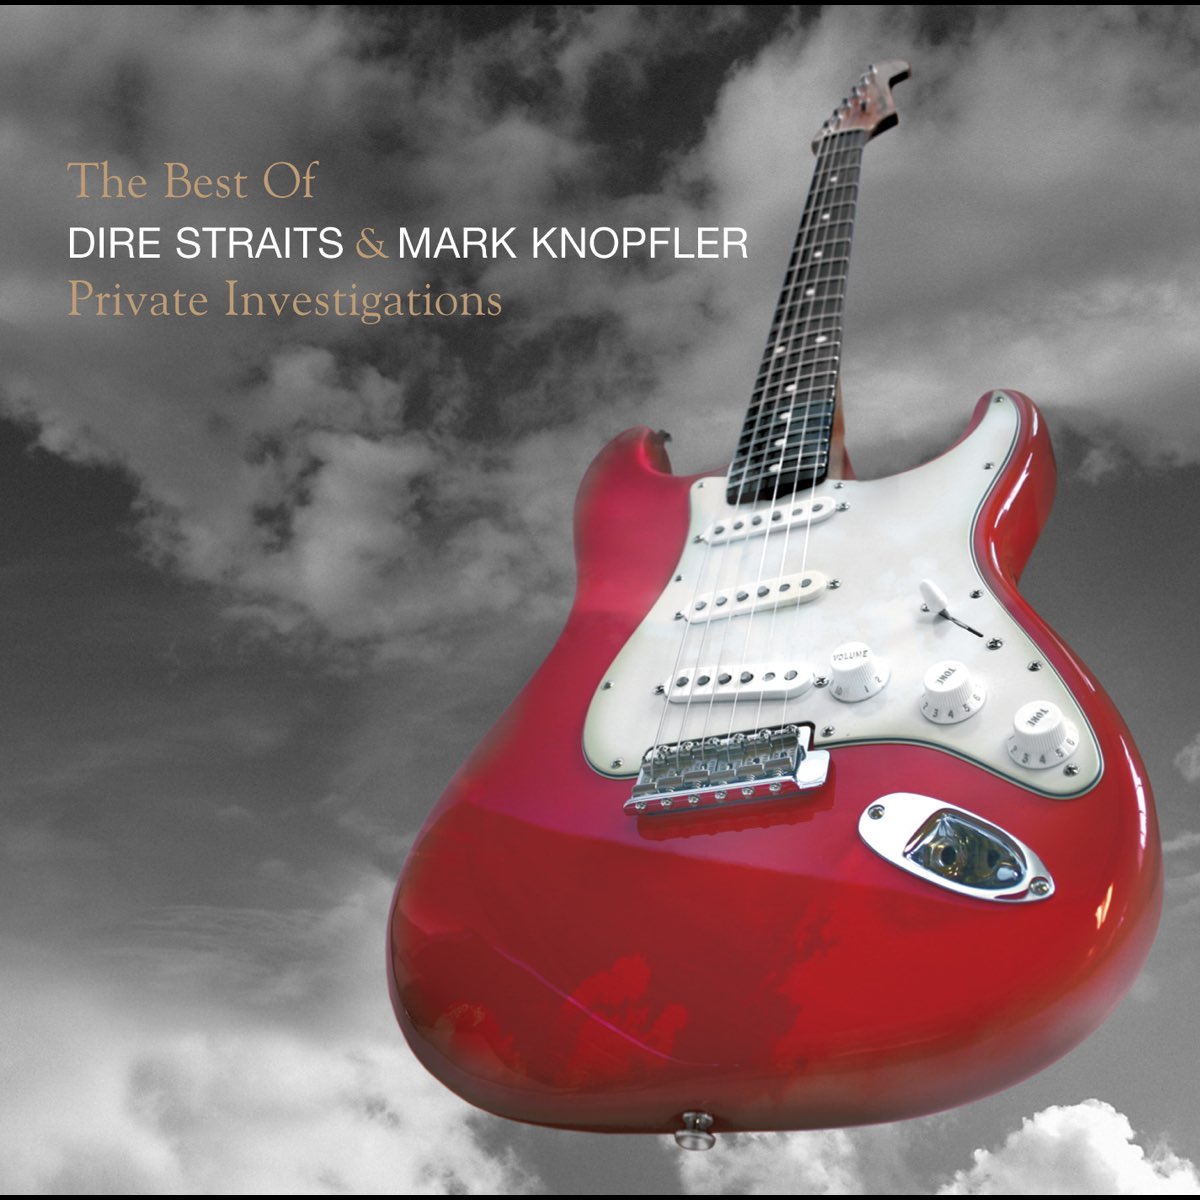 Рок Mercury Mark, Knopfler, Dire Straits - Private Investigations - The Best Of (Limited Red Vinyl 2LP)